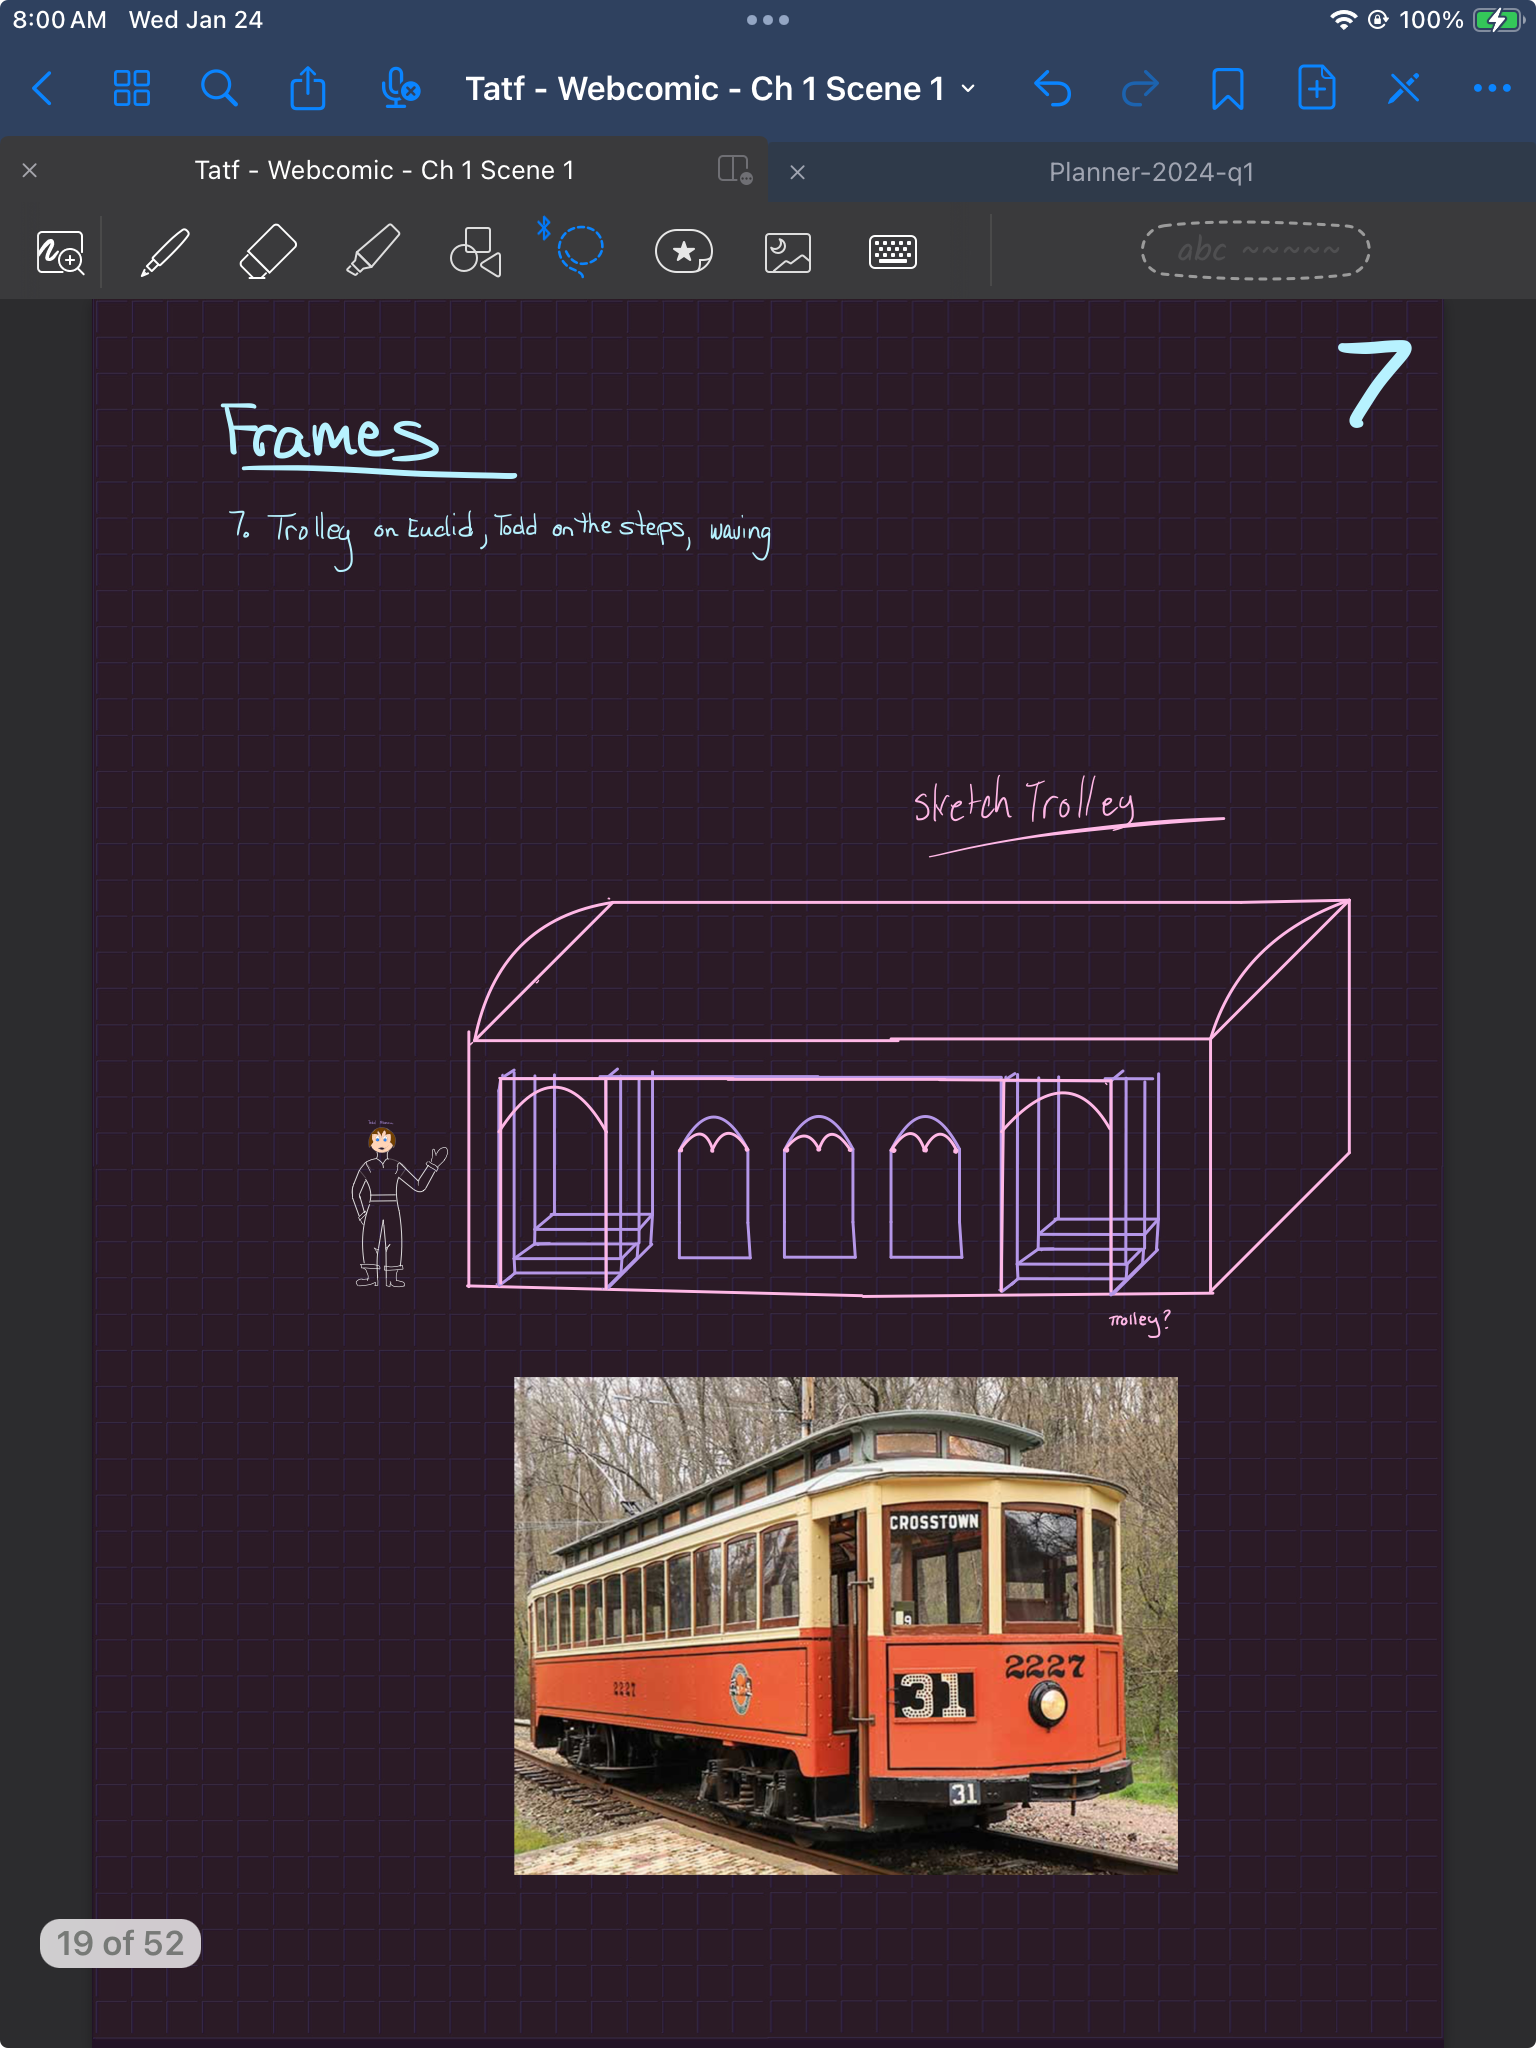 Cleveland Trolley - Frame 7 - Todd and the Fae